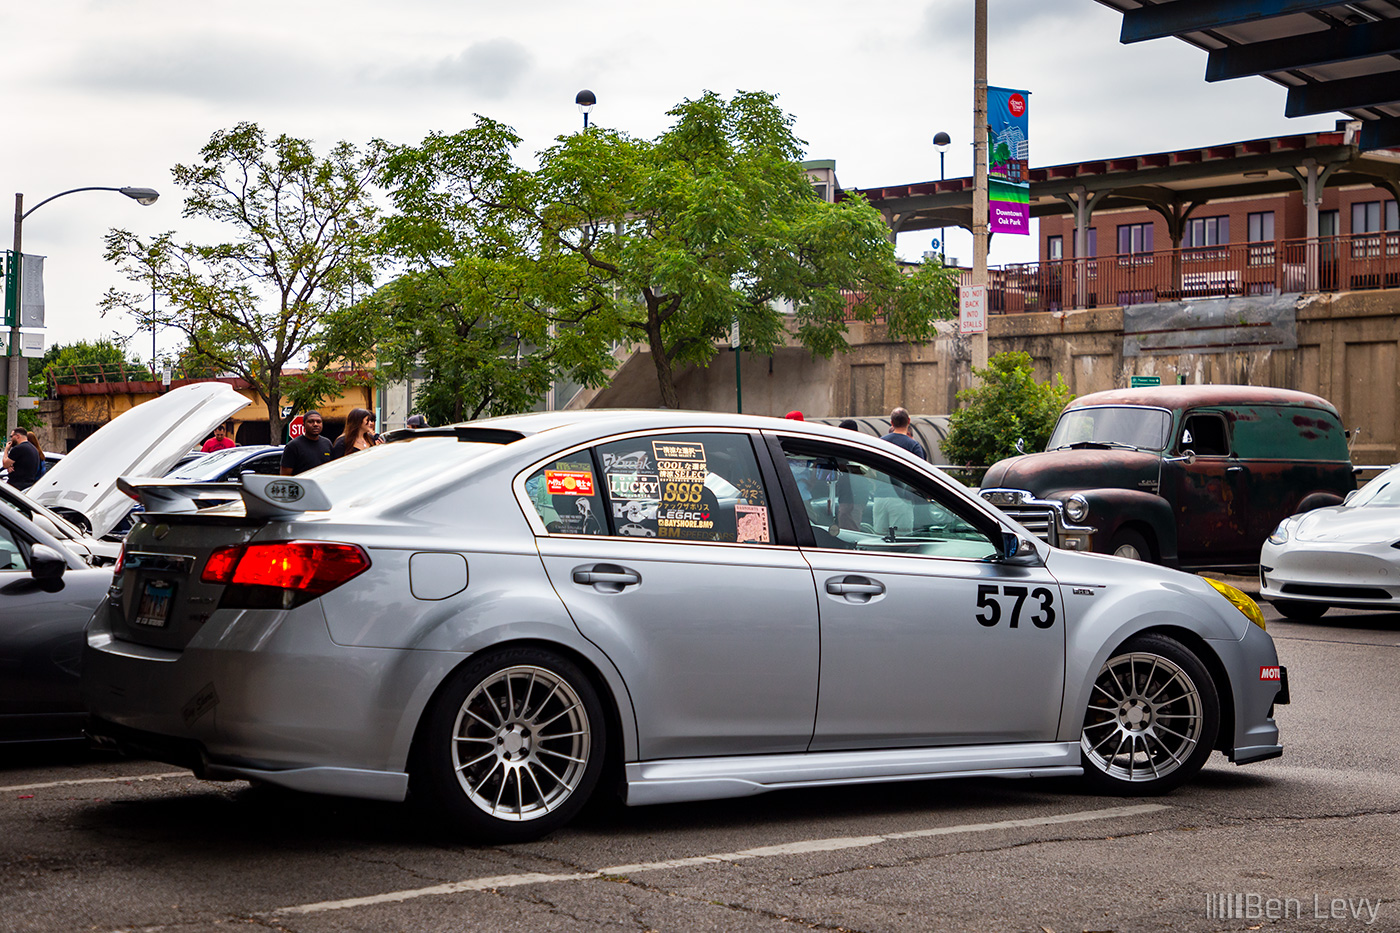 Silver H6 Subaru Legacy with Number 573